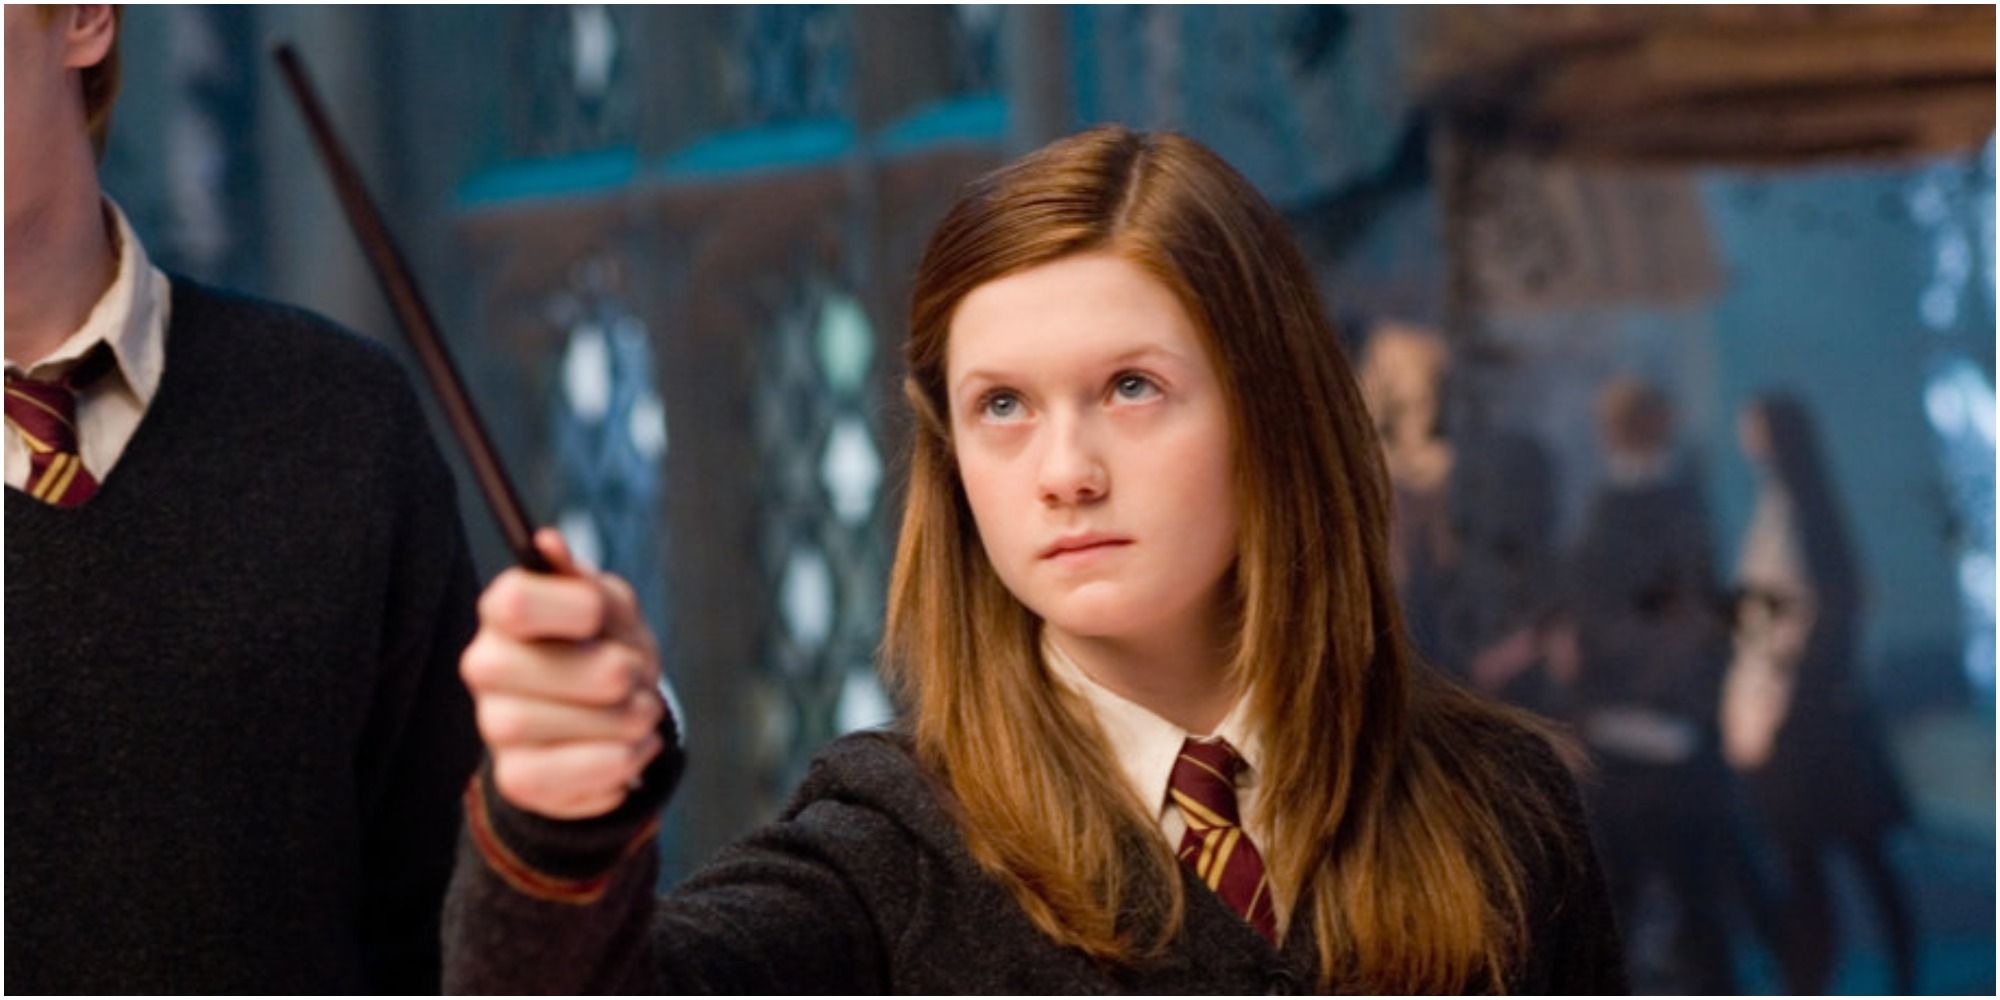 Ginny practising with Dumbledore's army in Harry Potter